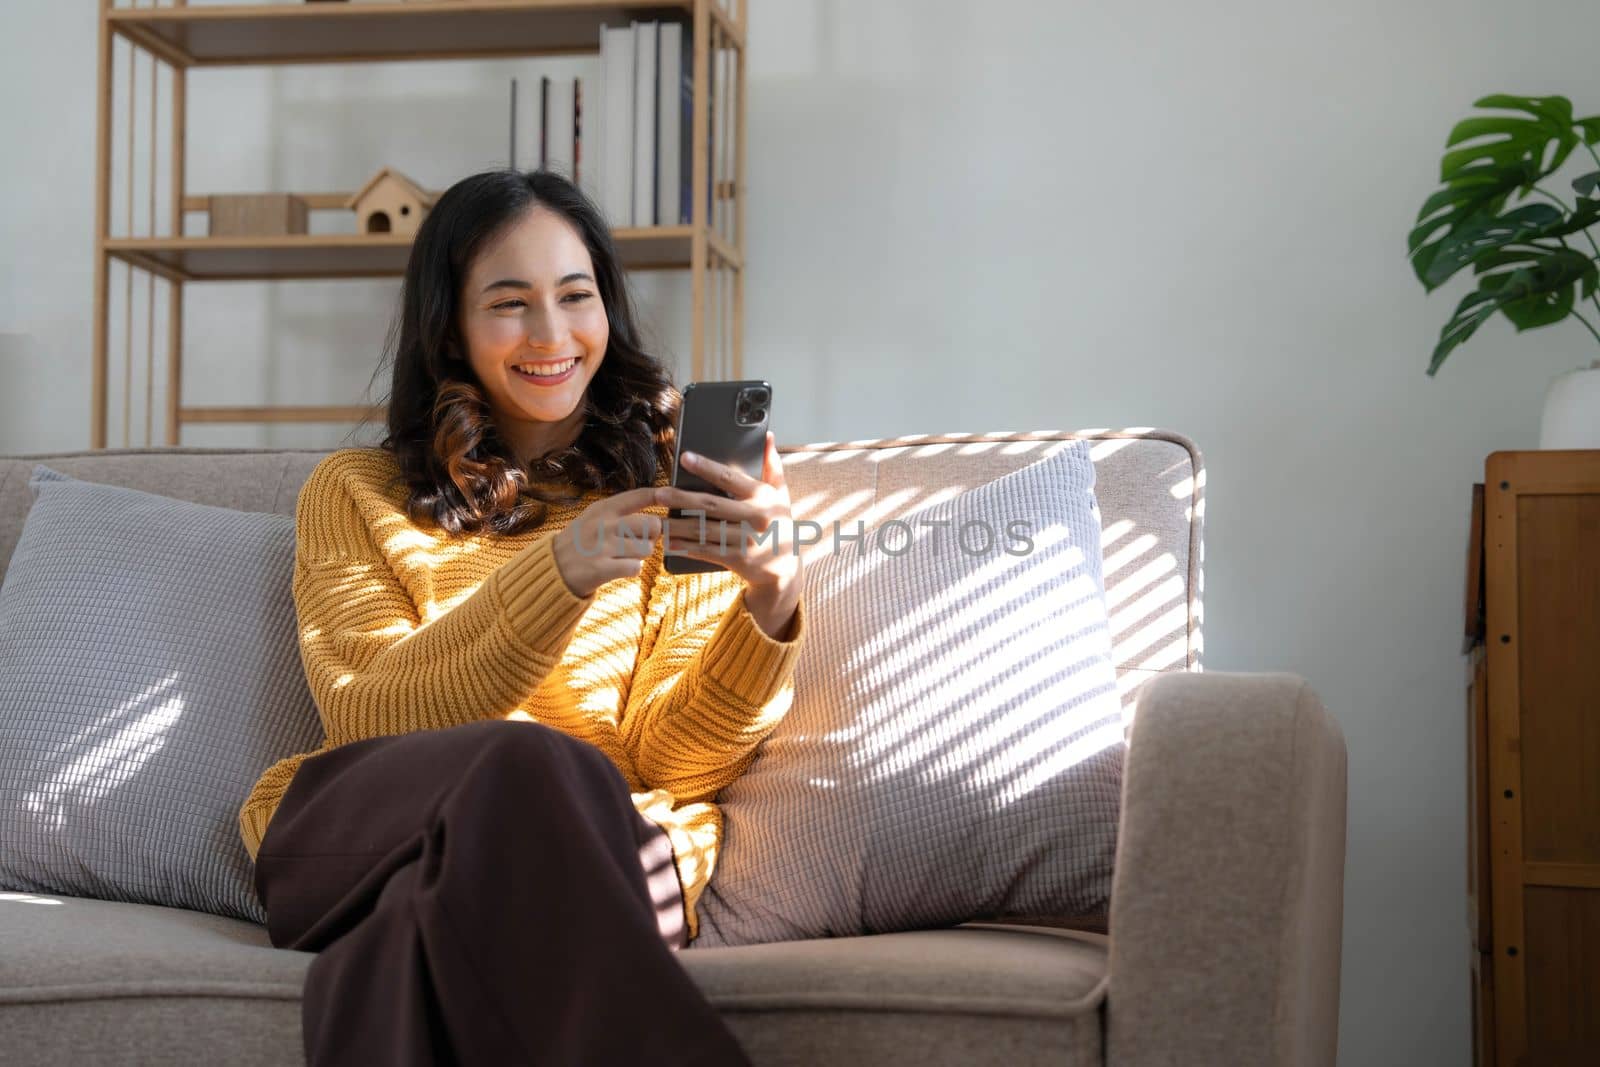 Happy girl checking social media holding smartphone at home. Smiling young latin woman using mobile phone app playing game, shopping online, ordering delivery relax on sofa..